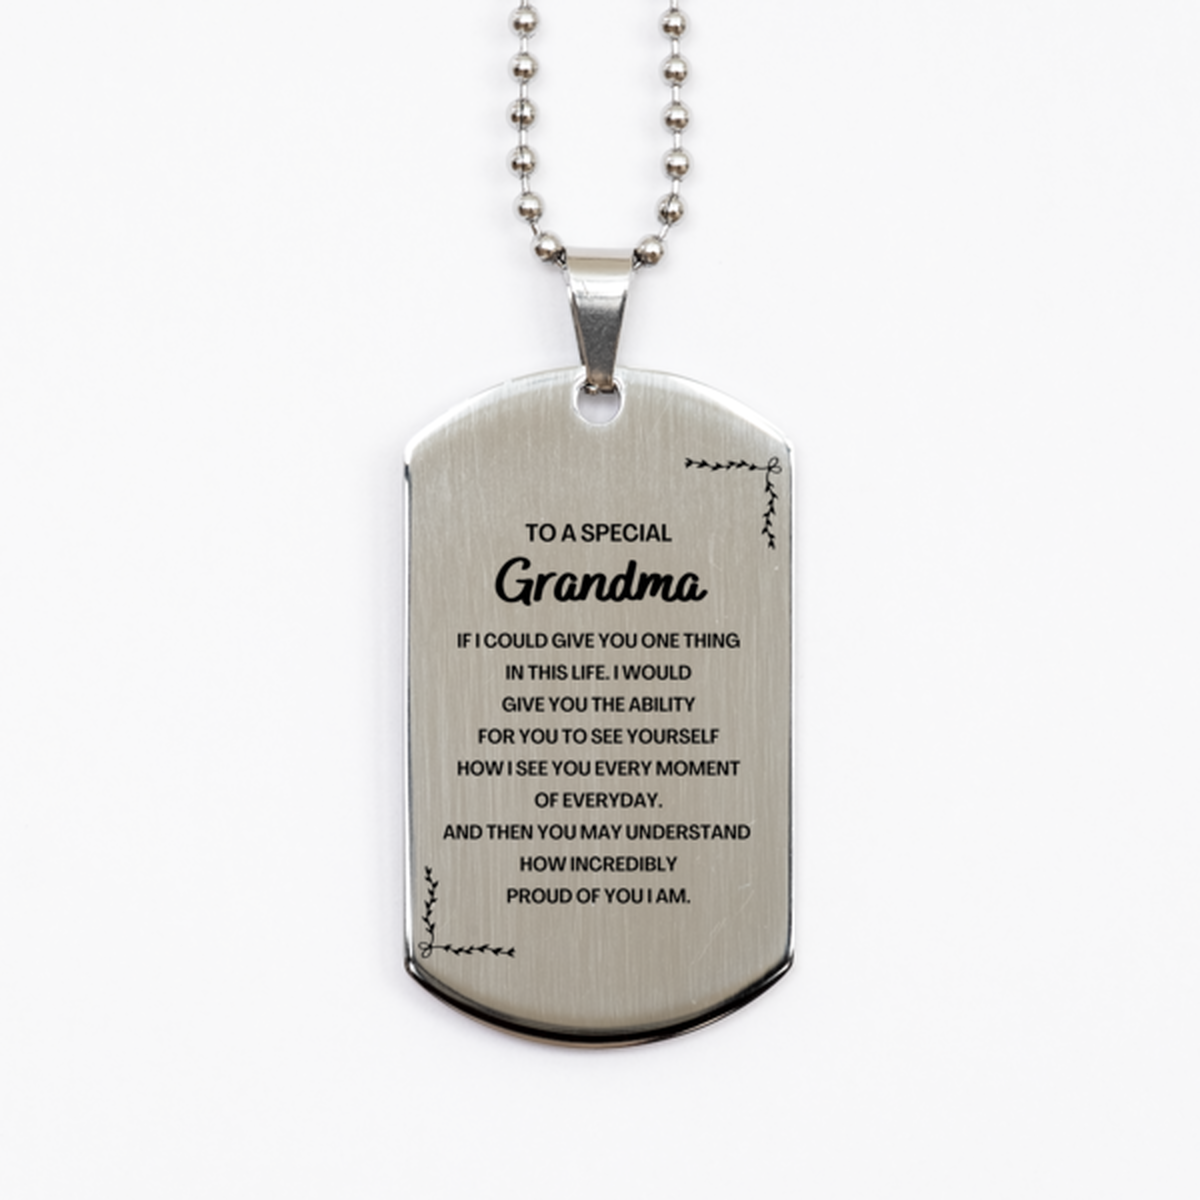 To My Grandma Silver Dog Tag, Gifts For Grandma Engraved, Inspirational Gifts for Christmas Birthday, Epic Gifts for Grandma To A Special Grandma how incredibly proud of you I am